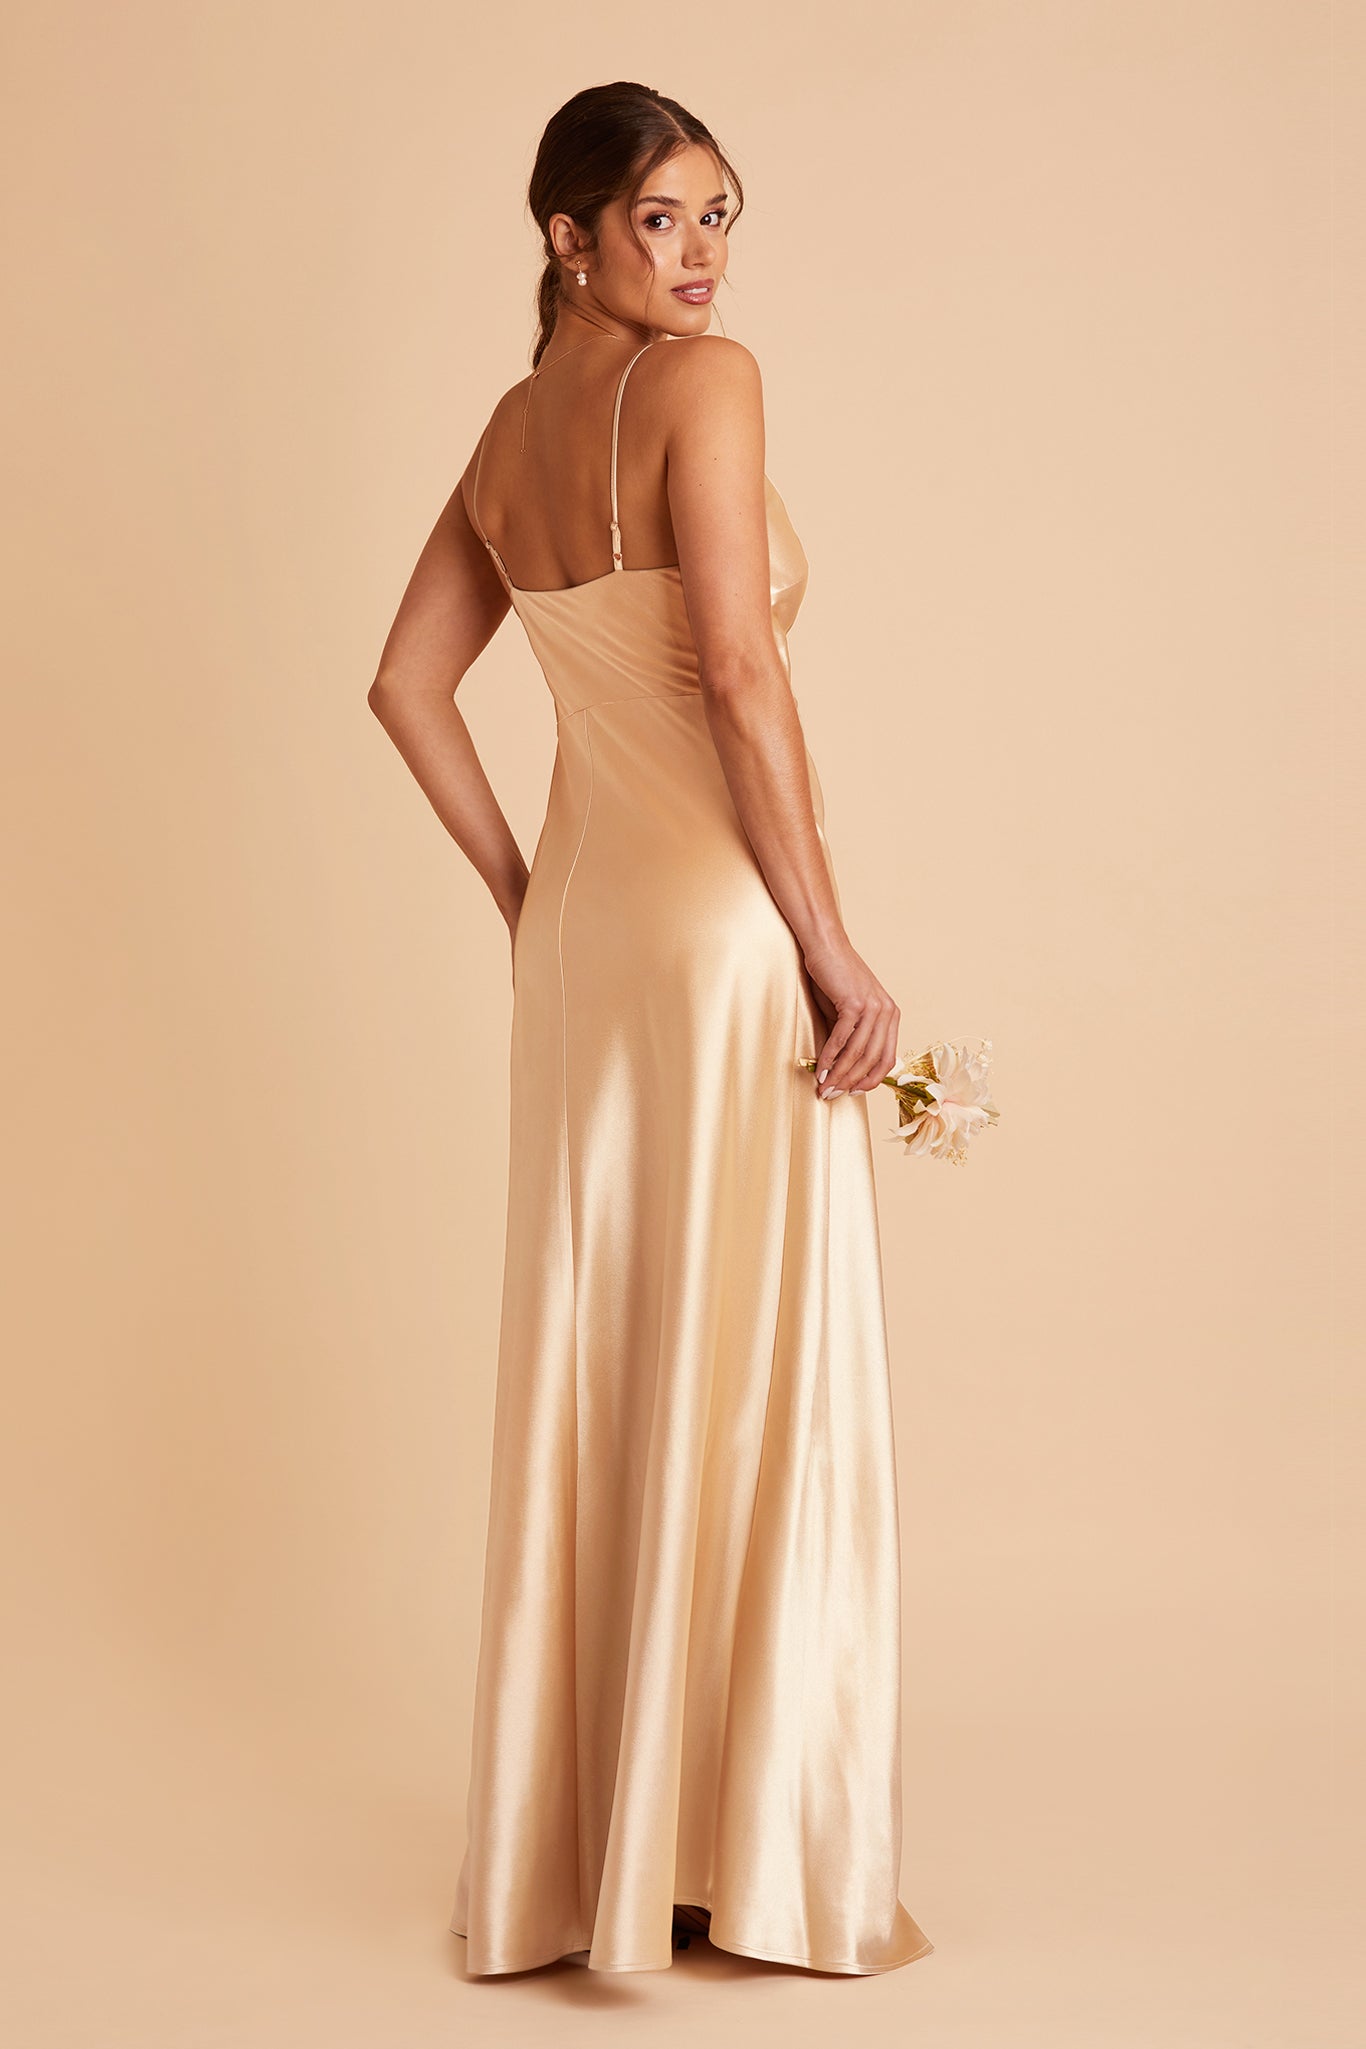 Back view of the Lisa Long Dress in gold satin shows the back of the dress with adjustable spaghetti straps and a smooth fit in the bodice and waist that attach to a floor-length skirt.  